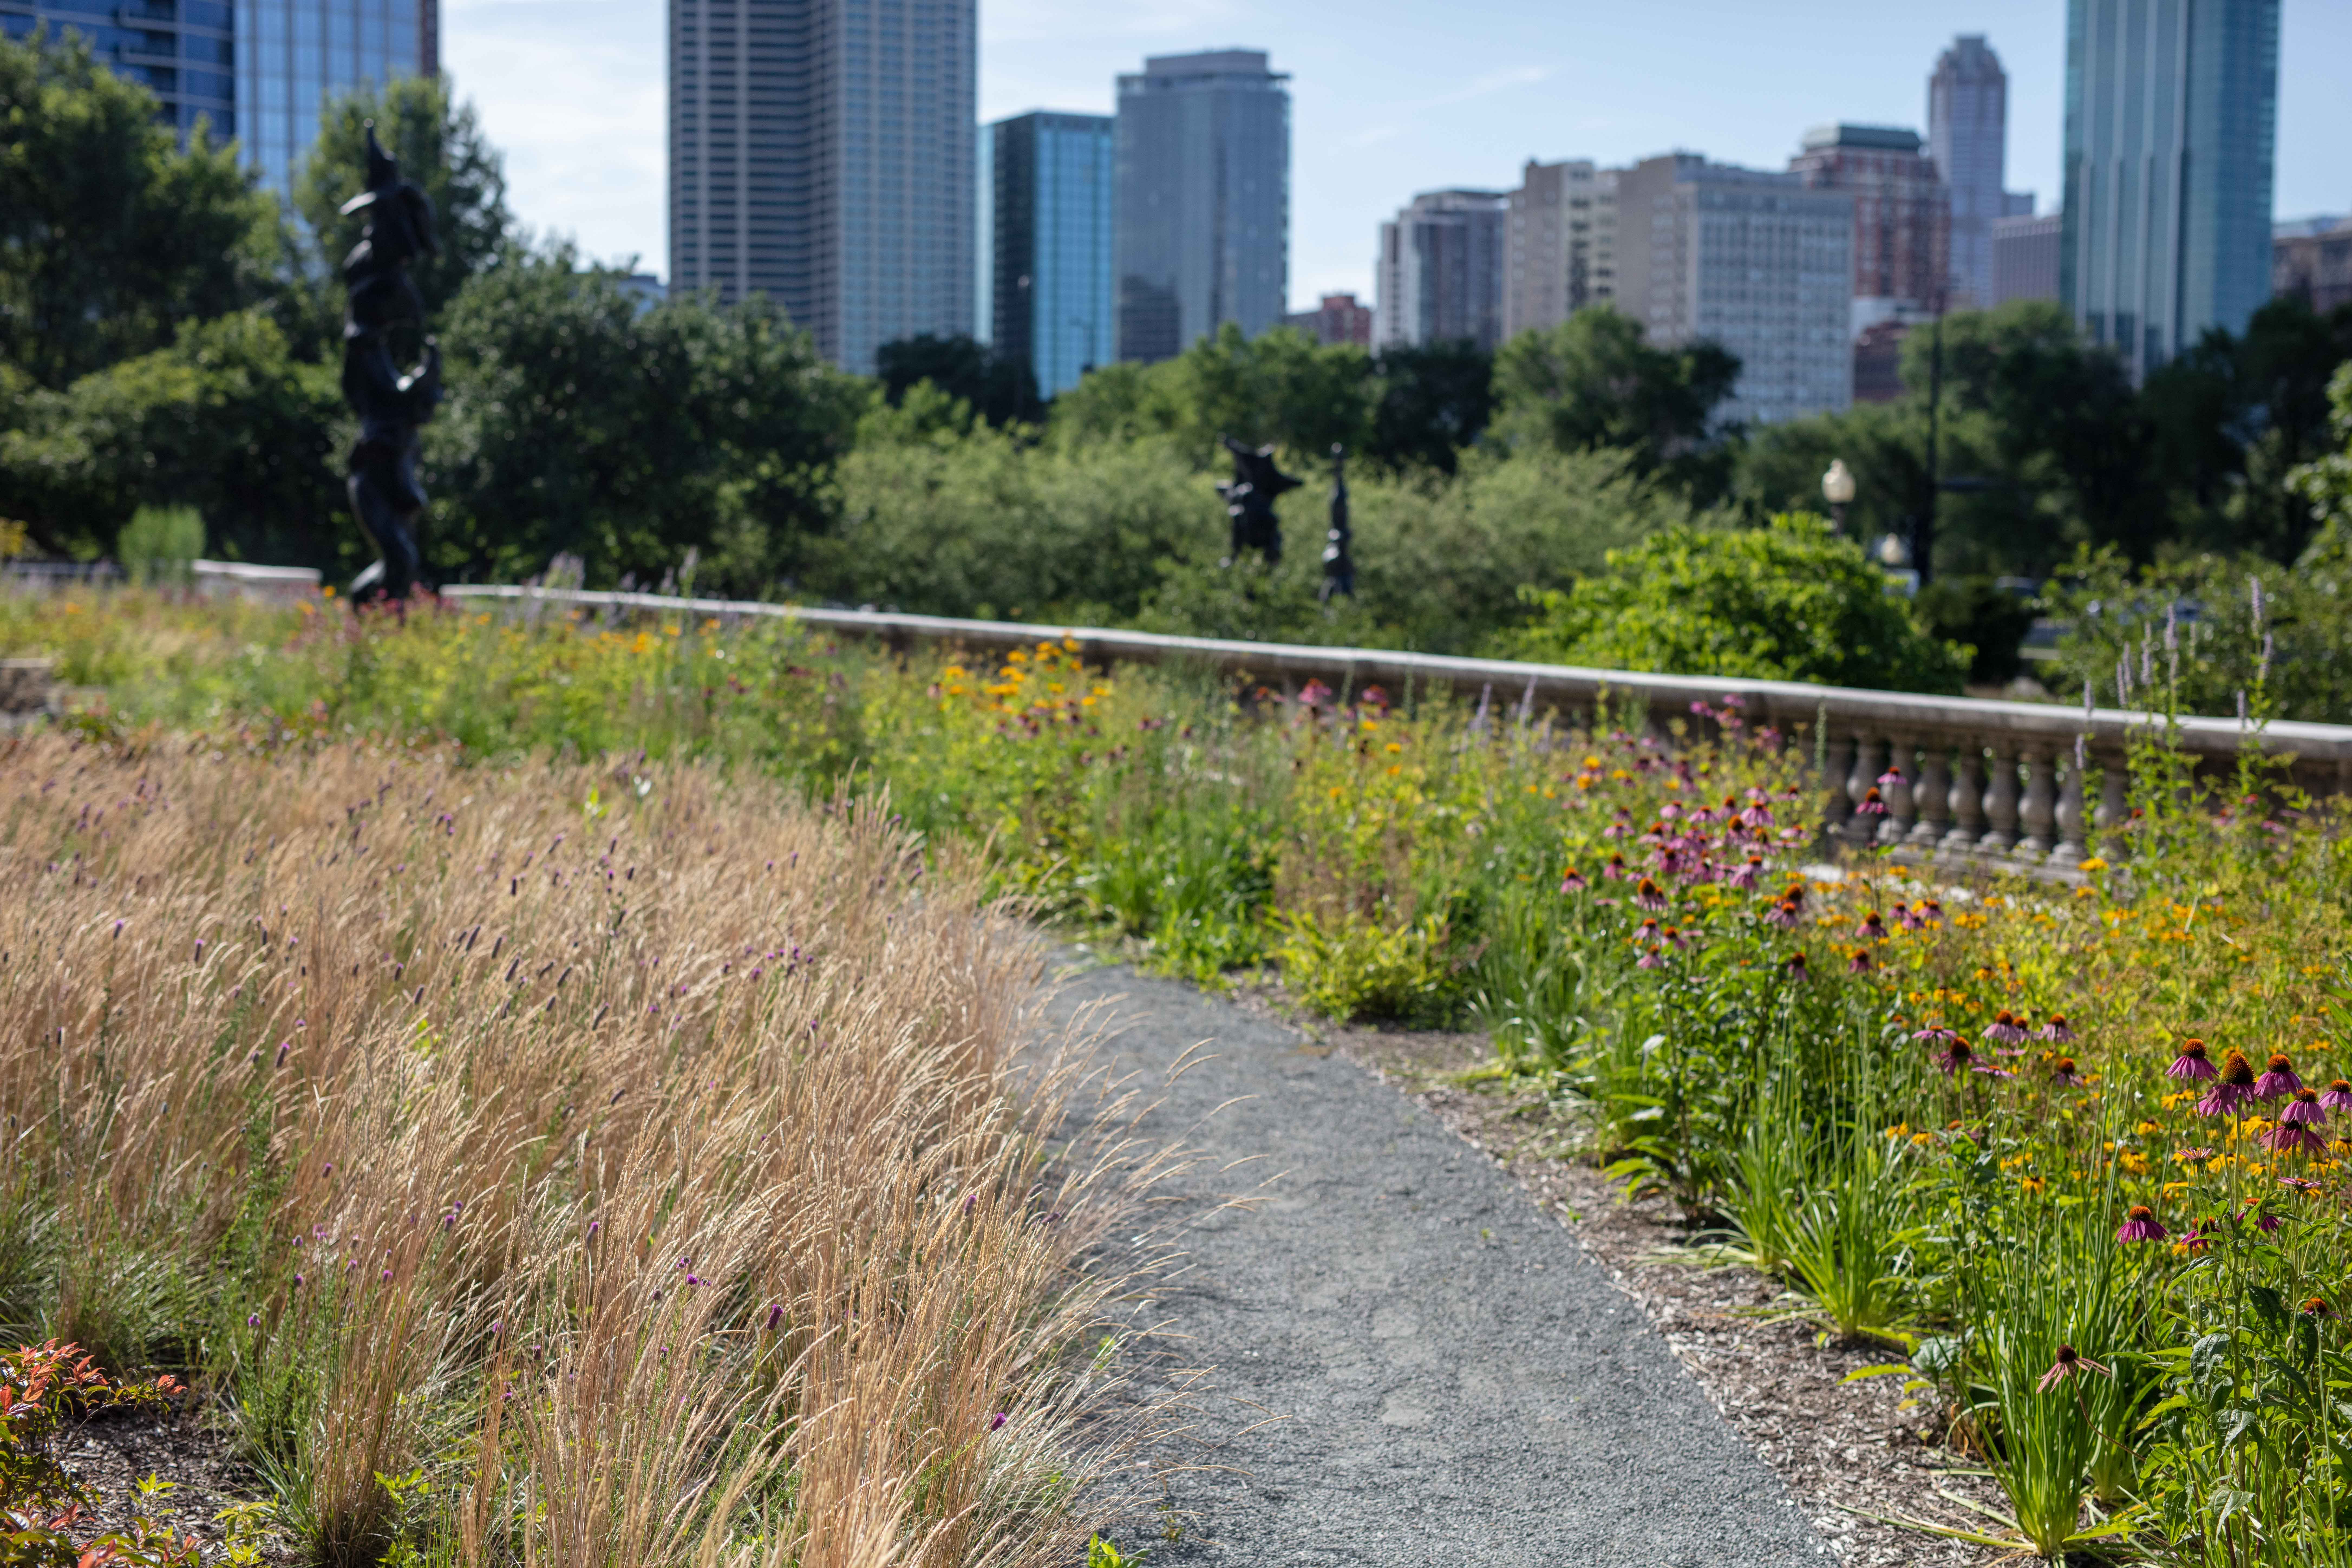 a gravel path through a garden of tall native plants, a city landscape of skyscrapers can me seen in the background